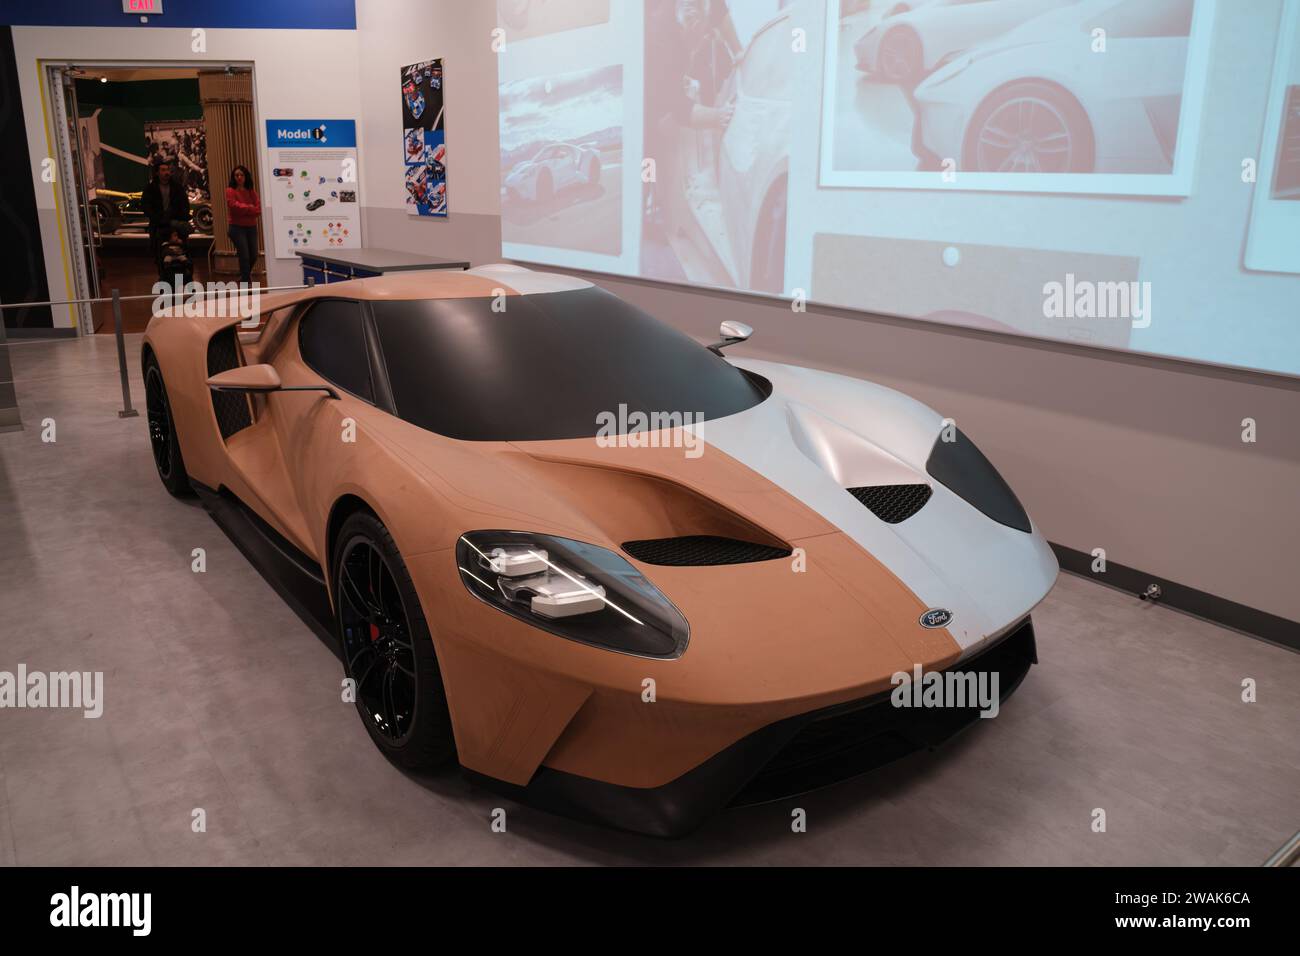 2016 Ford GT clay model on display at the Henry Ford Museum of American Innovation, Dearborn Michigan USA Stock Photo